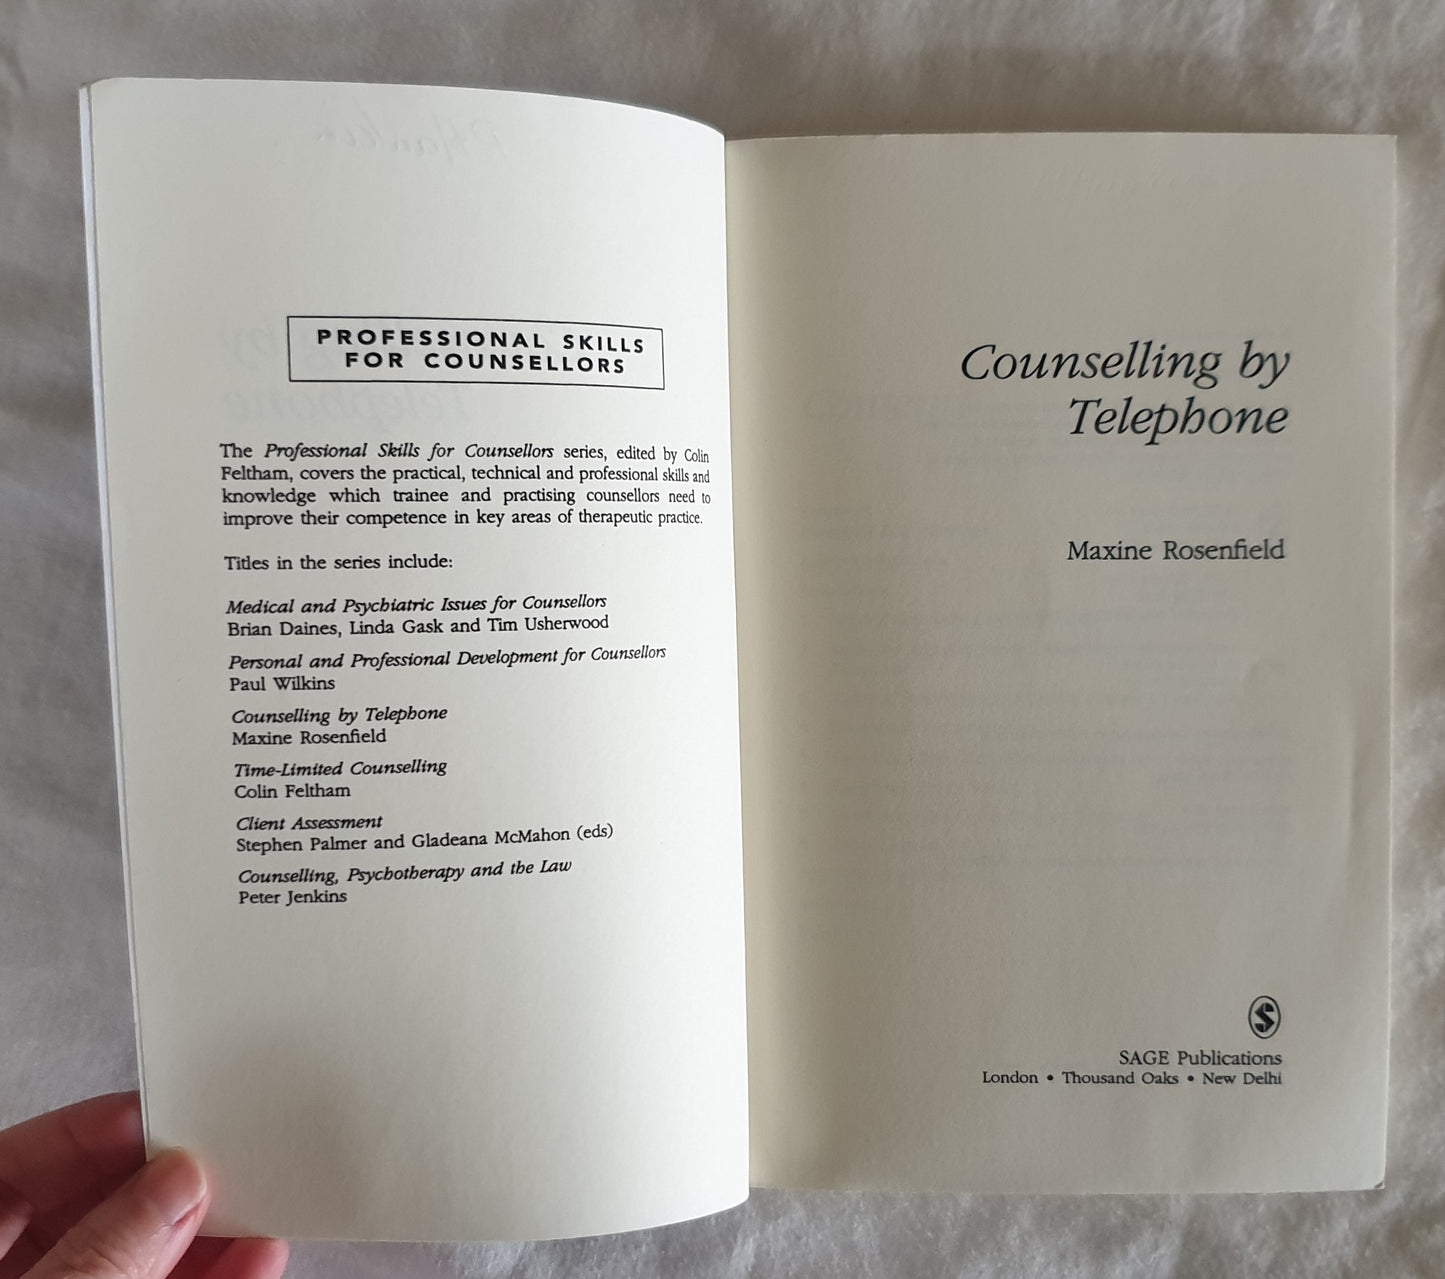 Counselling by Telephone by Maxine Rosenfield